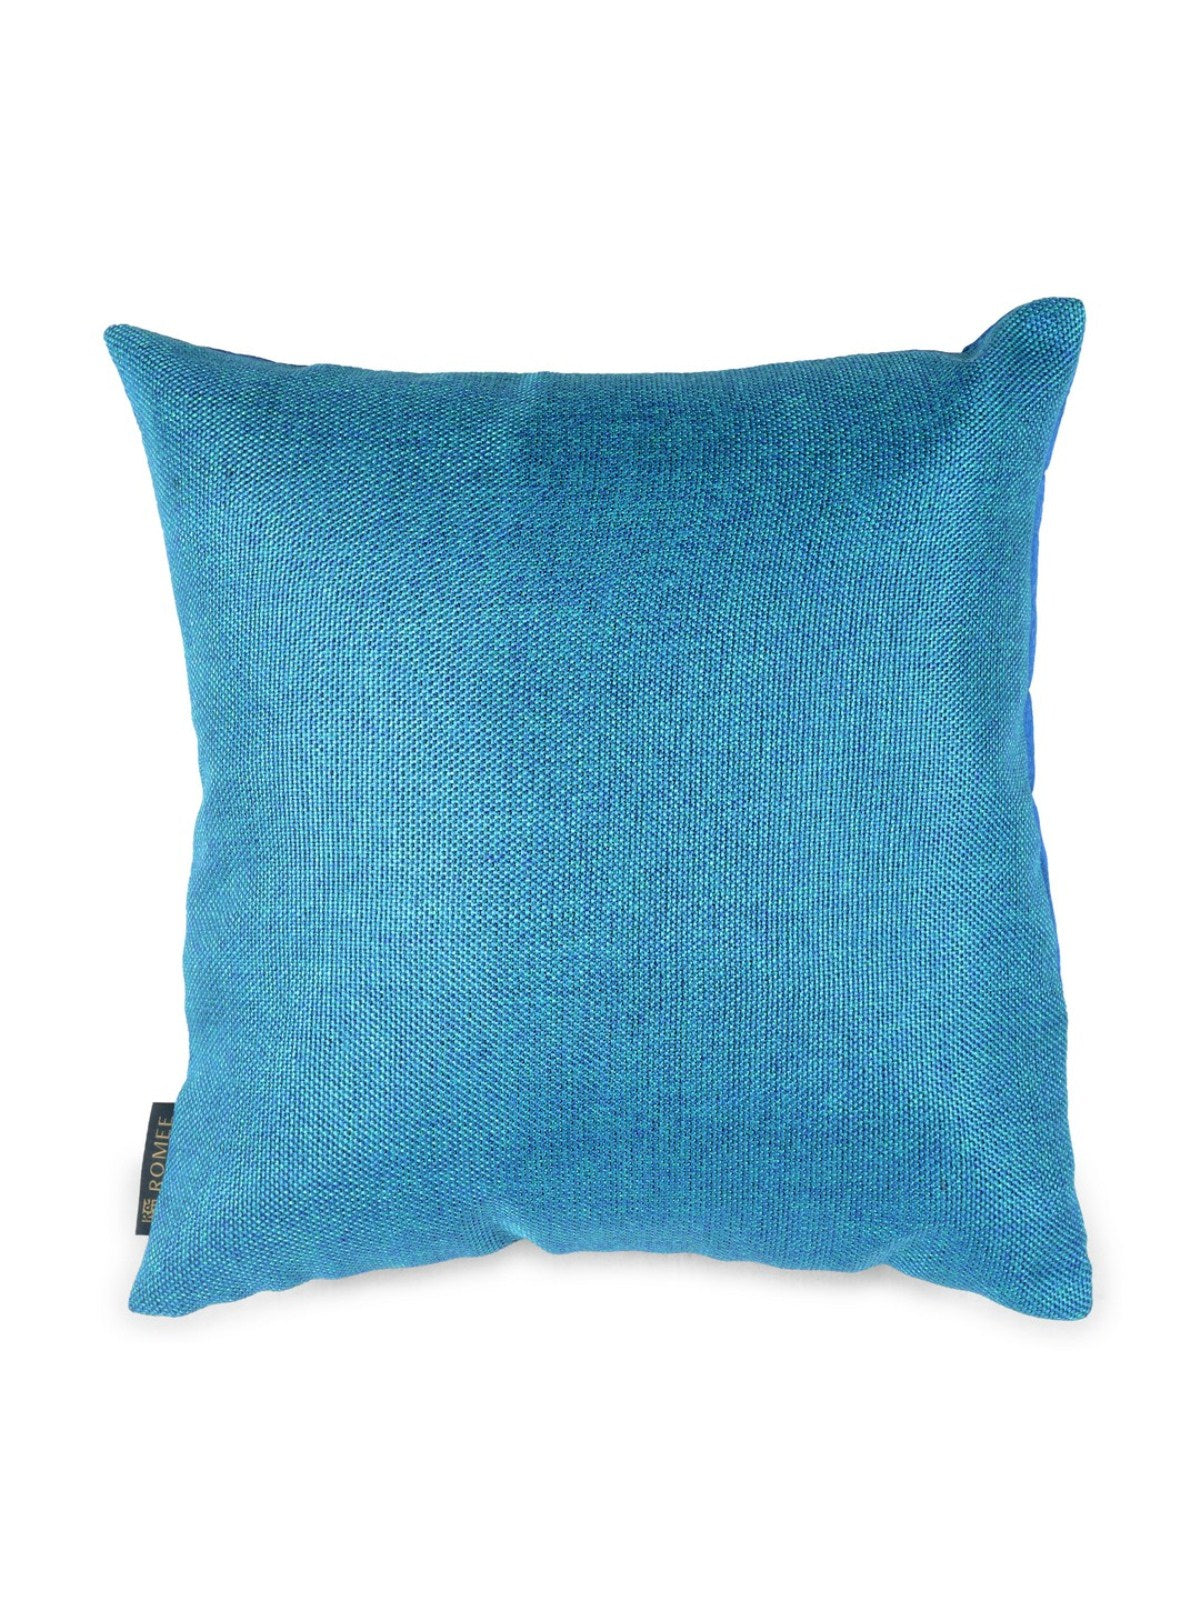 Jute Synthetic Solid Cushion Covers (Blue, 16x16-inch) - Set of 5